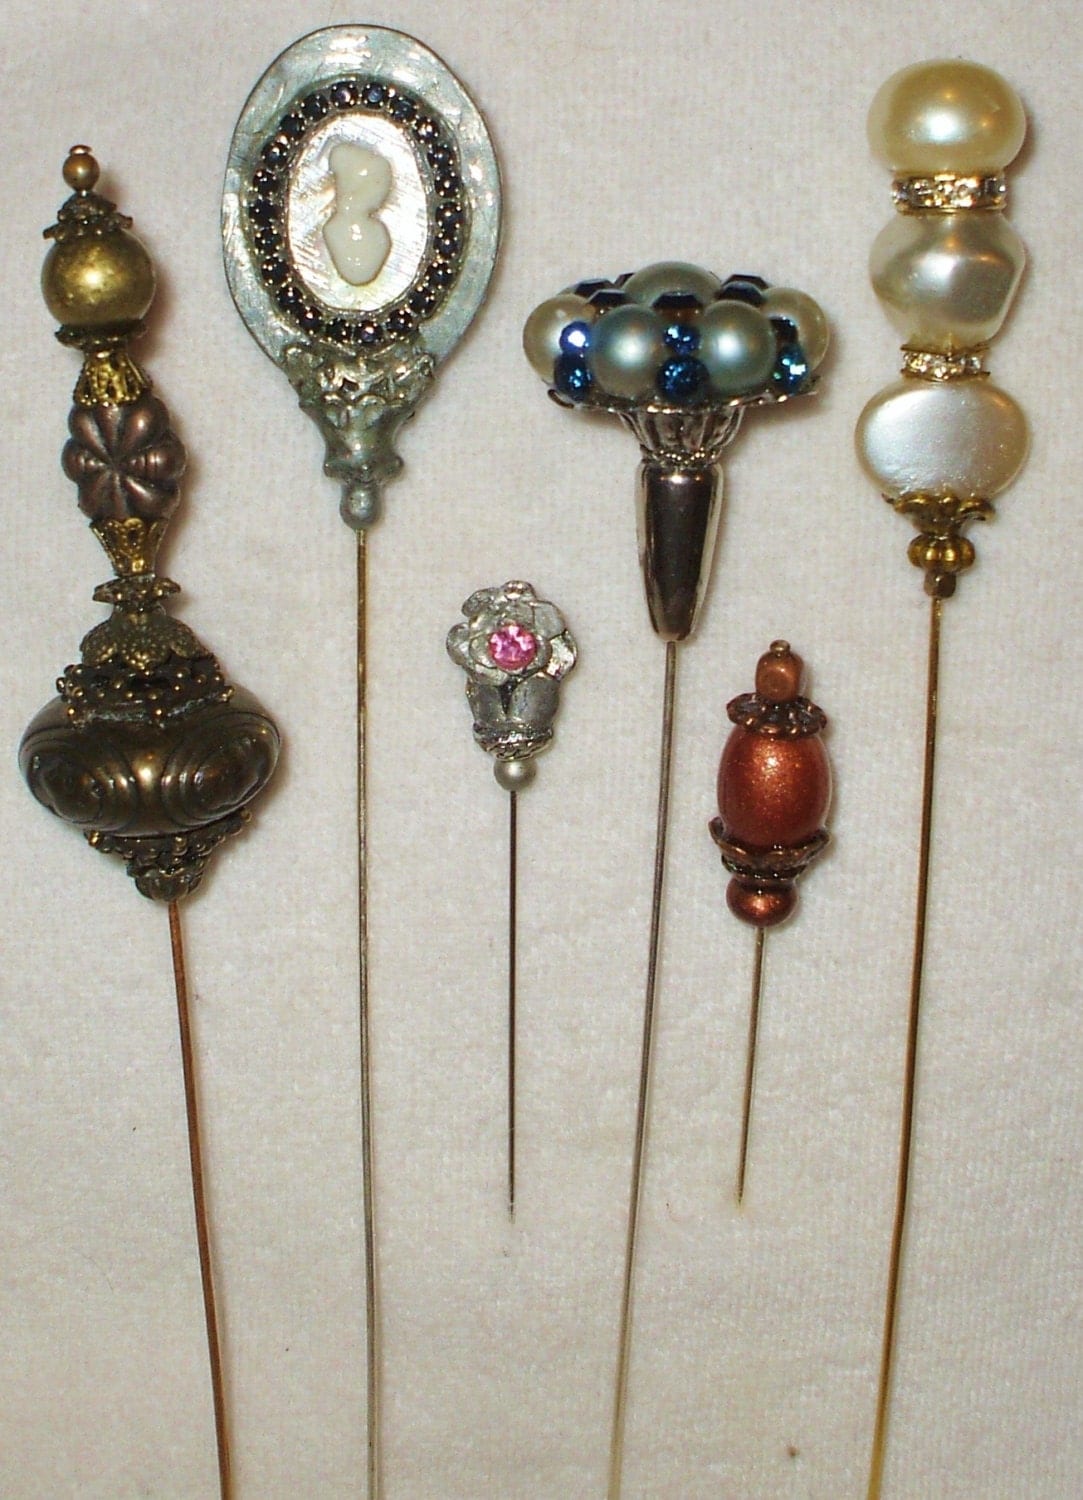 6 Antique style Victorian Hat Pins with by 